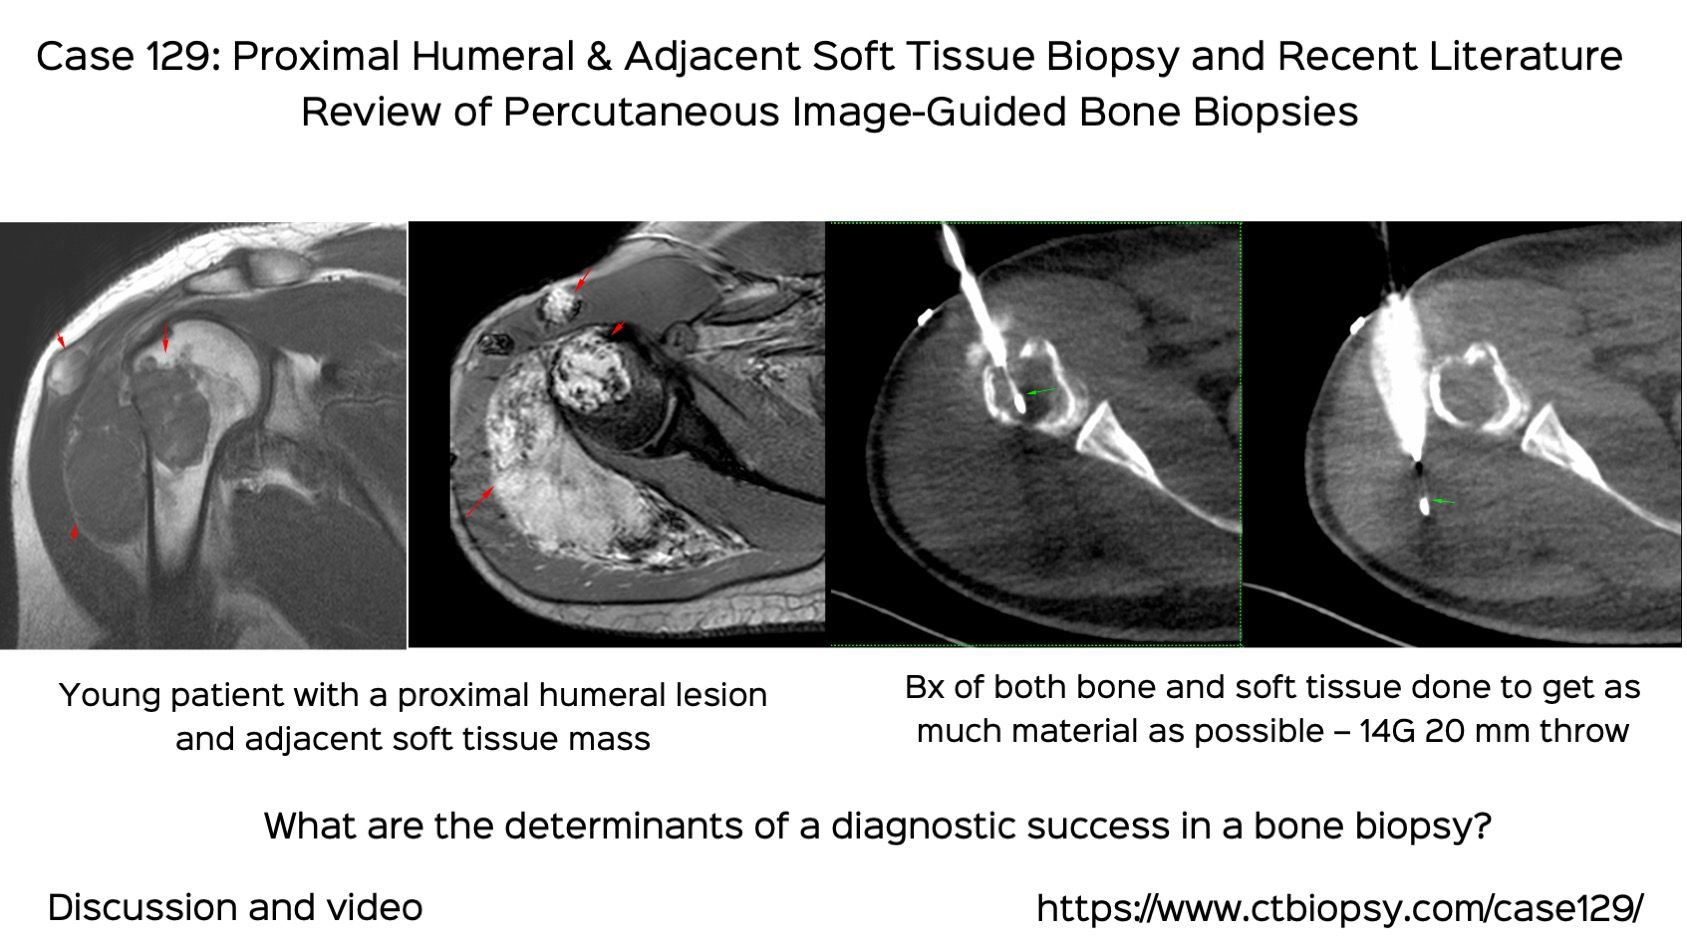 Case 129: Proximal Humerus and Adjacent Soft Tissue Biopsy (Bone and Soft Tissue) with Recent Literature Review of Bone Biopsies